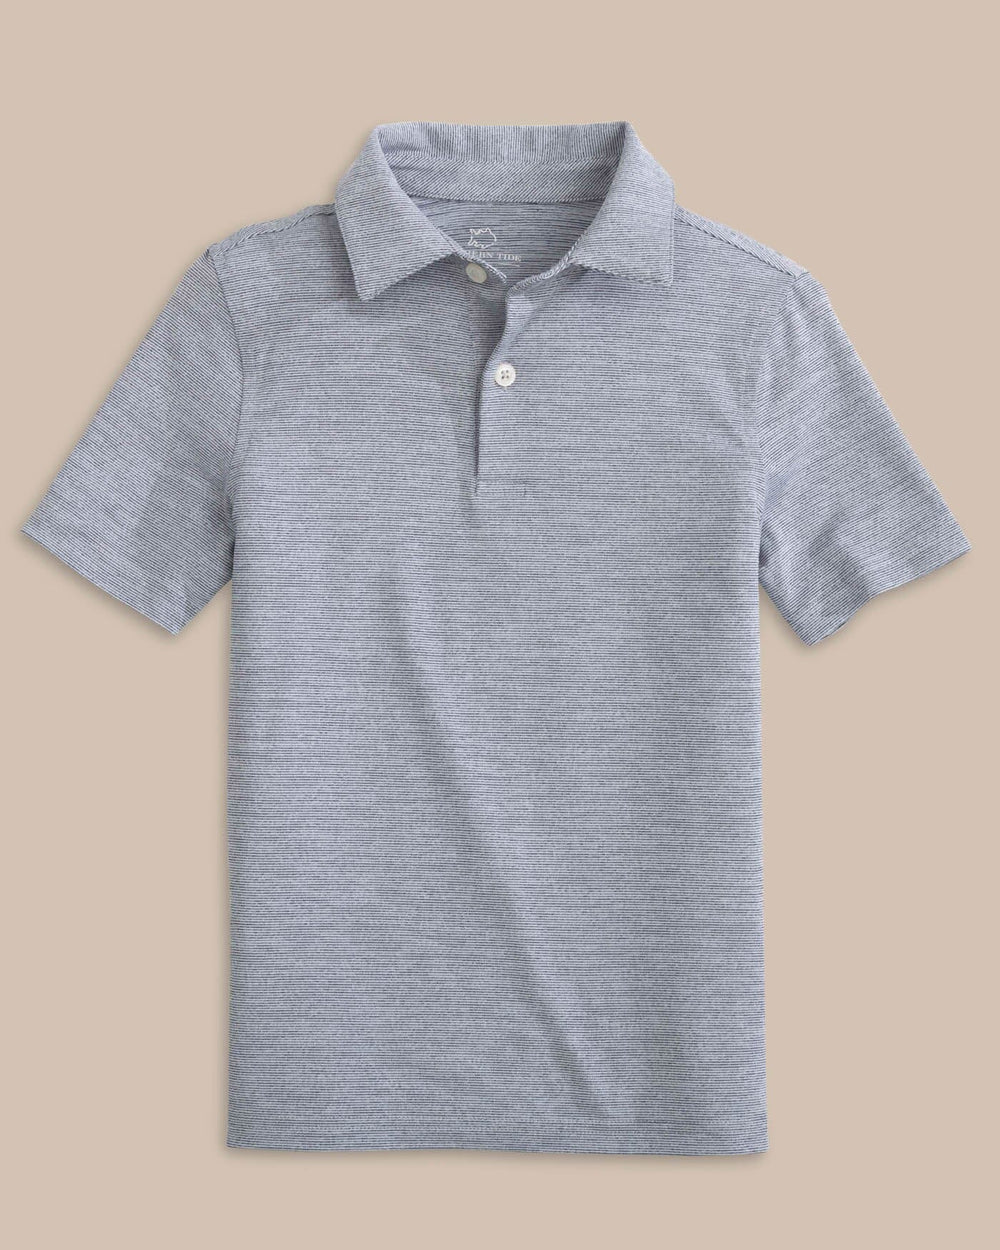 The front view of the Southern Tide Team Colors Boy's Driver Spacedye Polo Shirt by Southern Tide - Navy